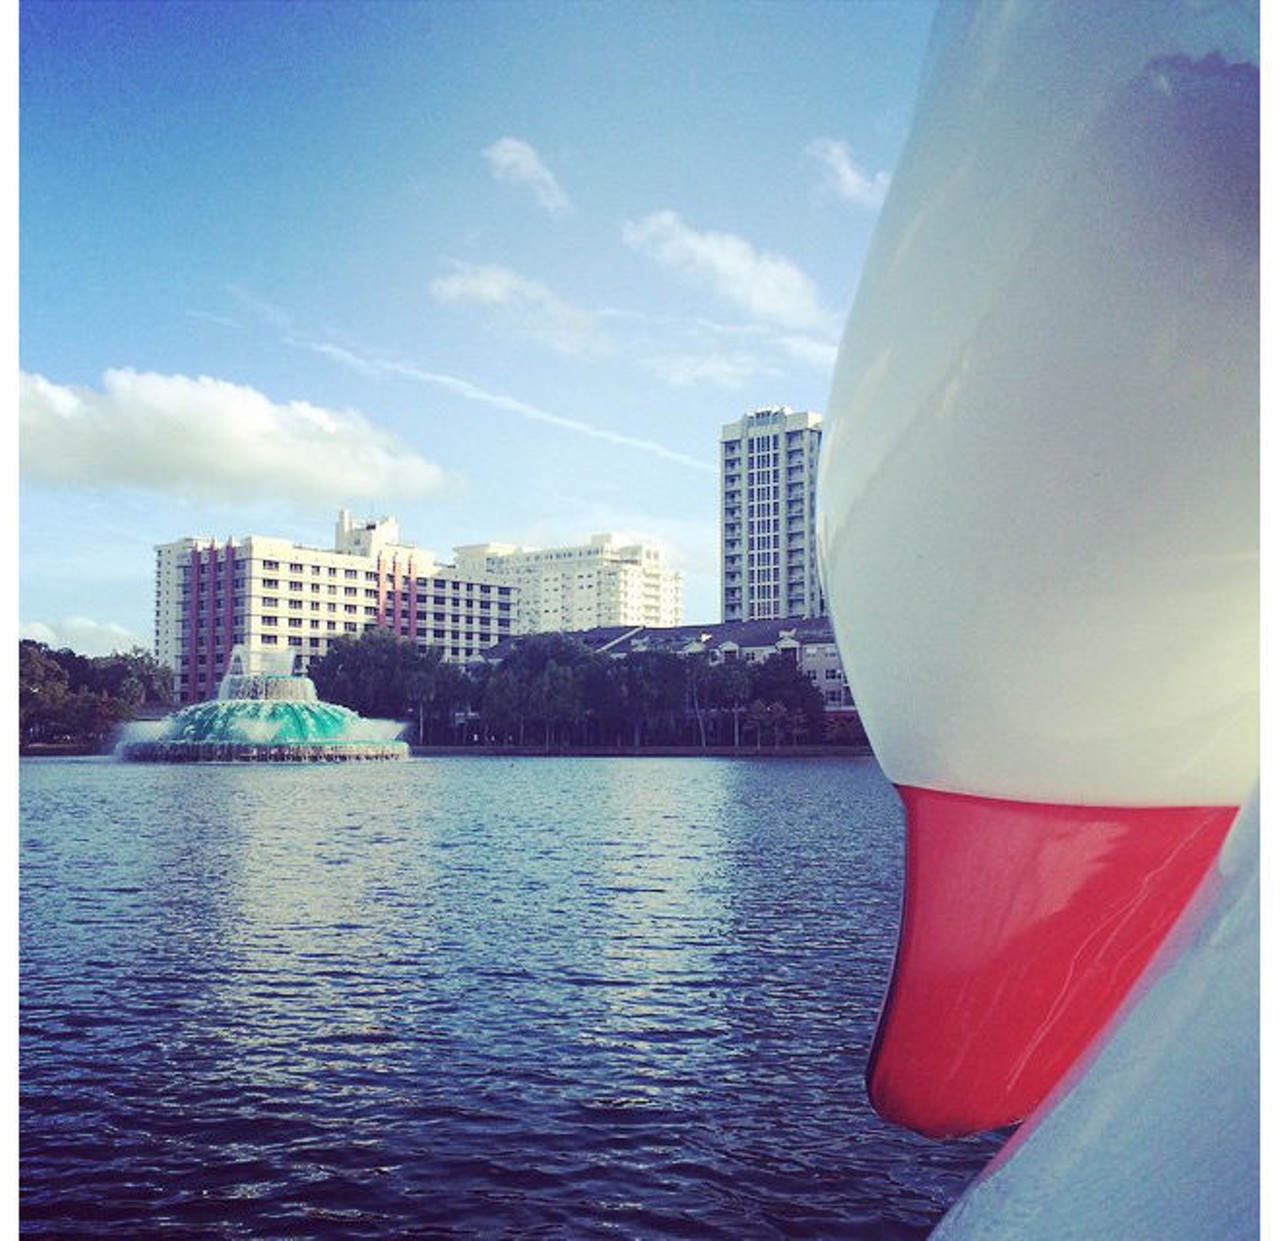 Taking a swan boat out for a spin on Lake Eola